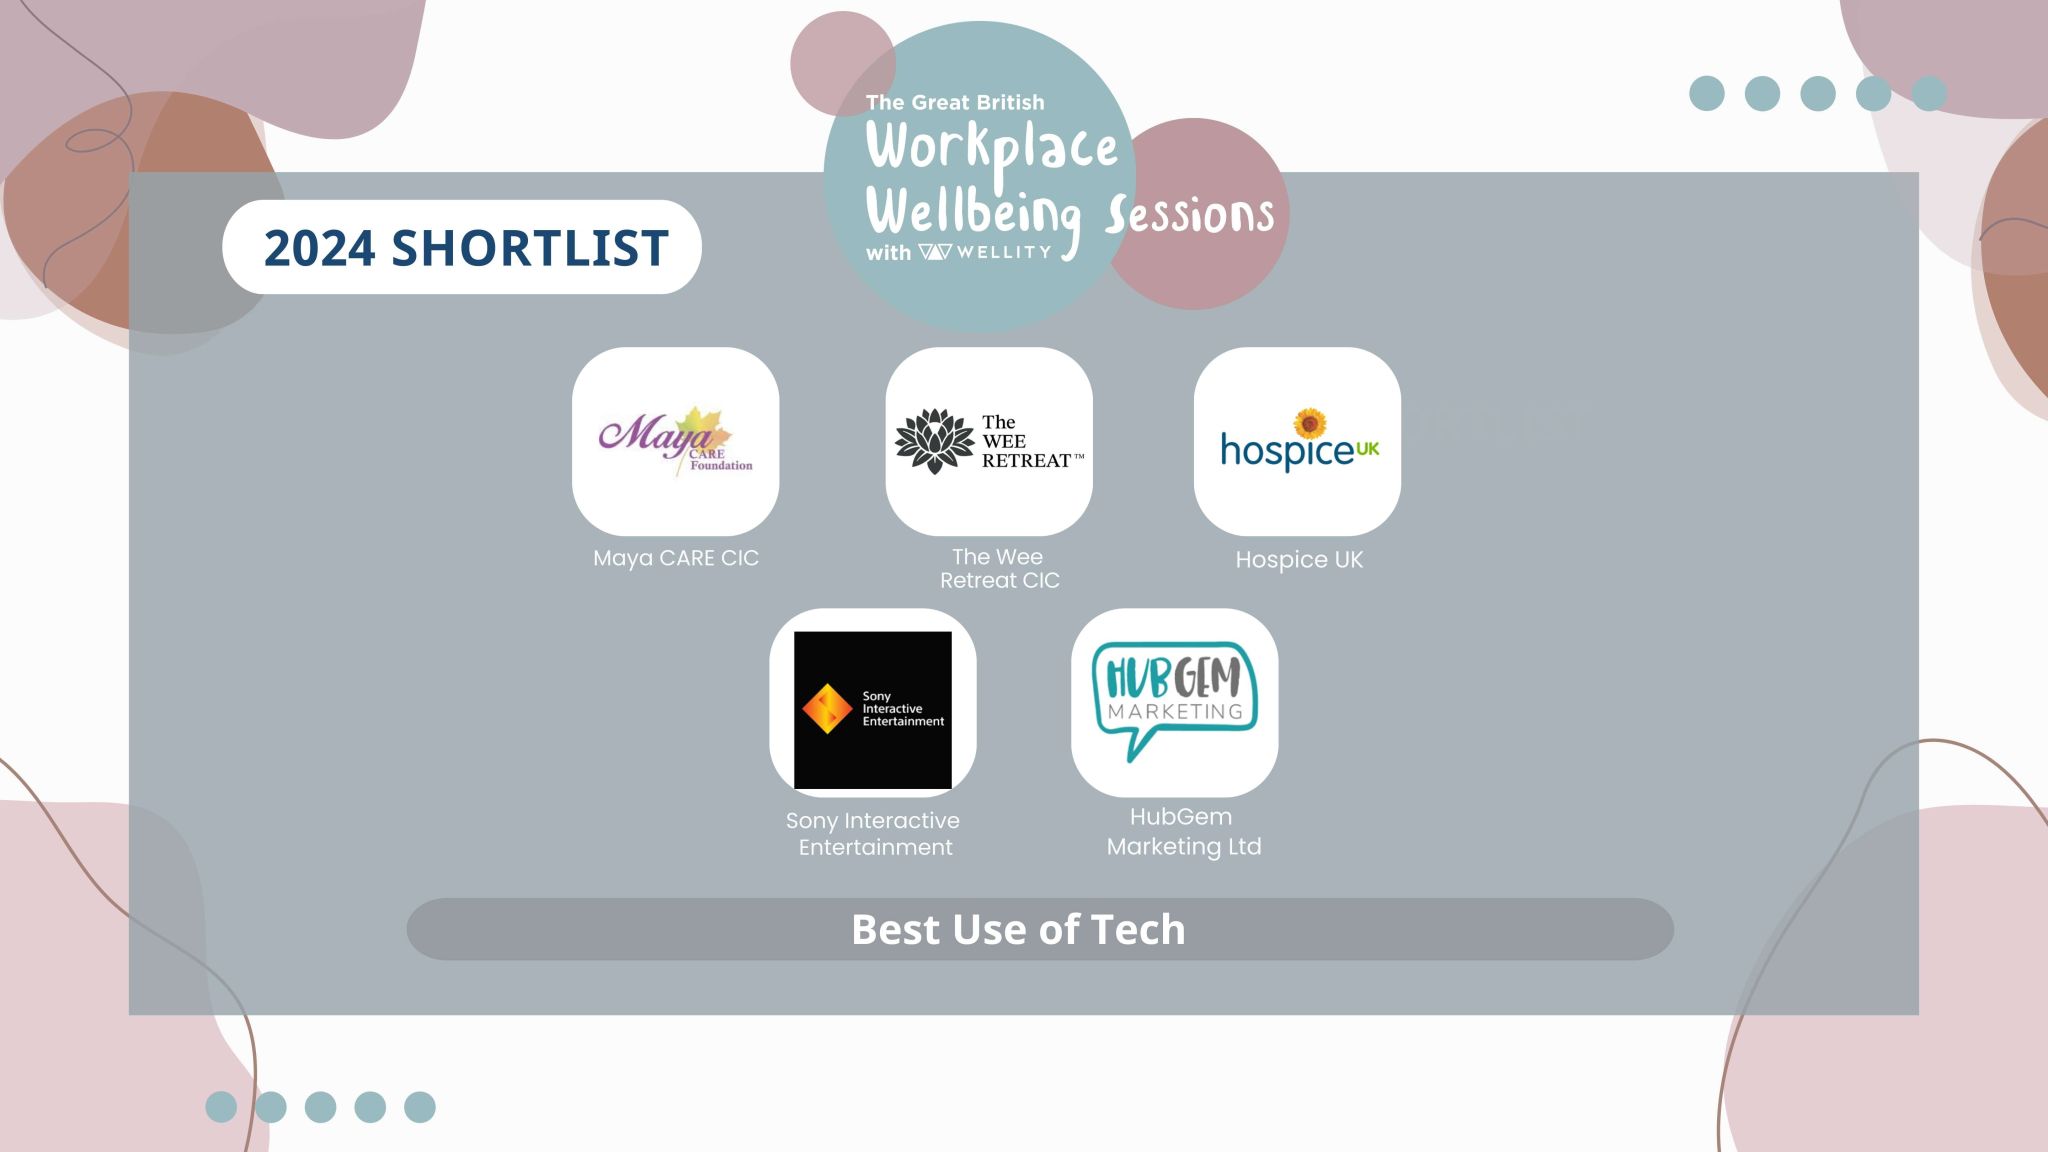 HubGem named finalists in two categories at the Great British Workplace Wellbeing Awards 2023